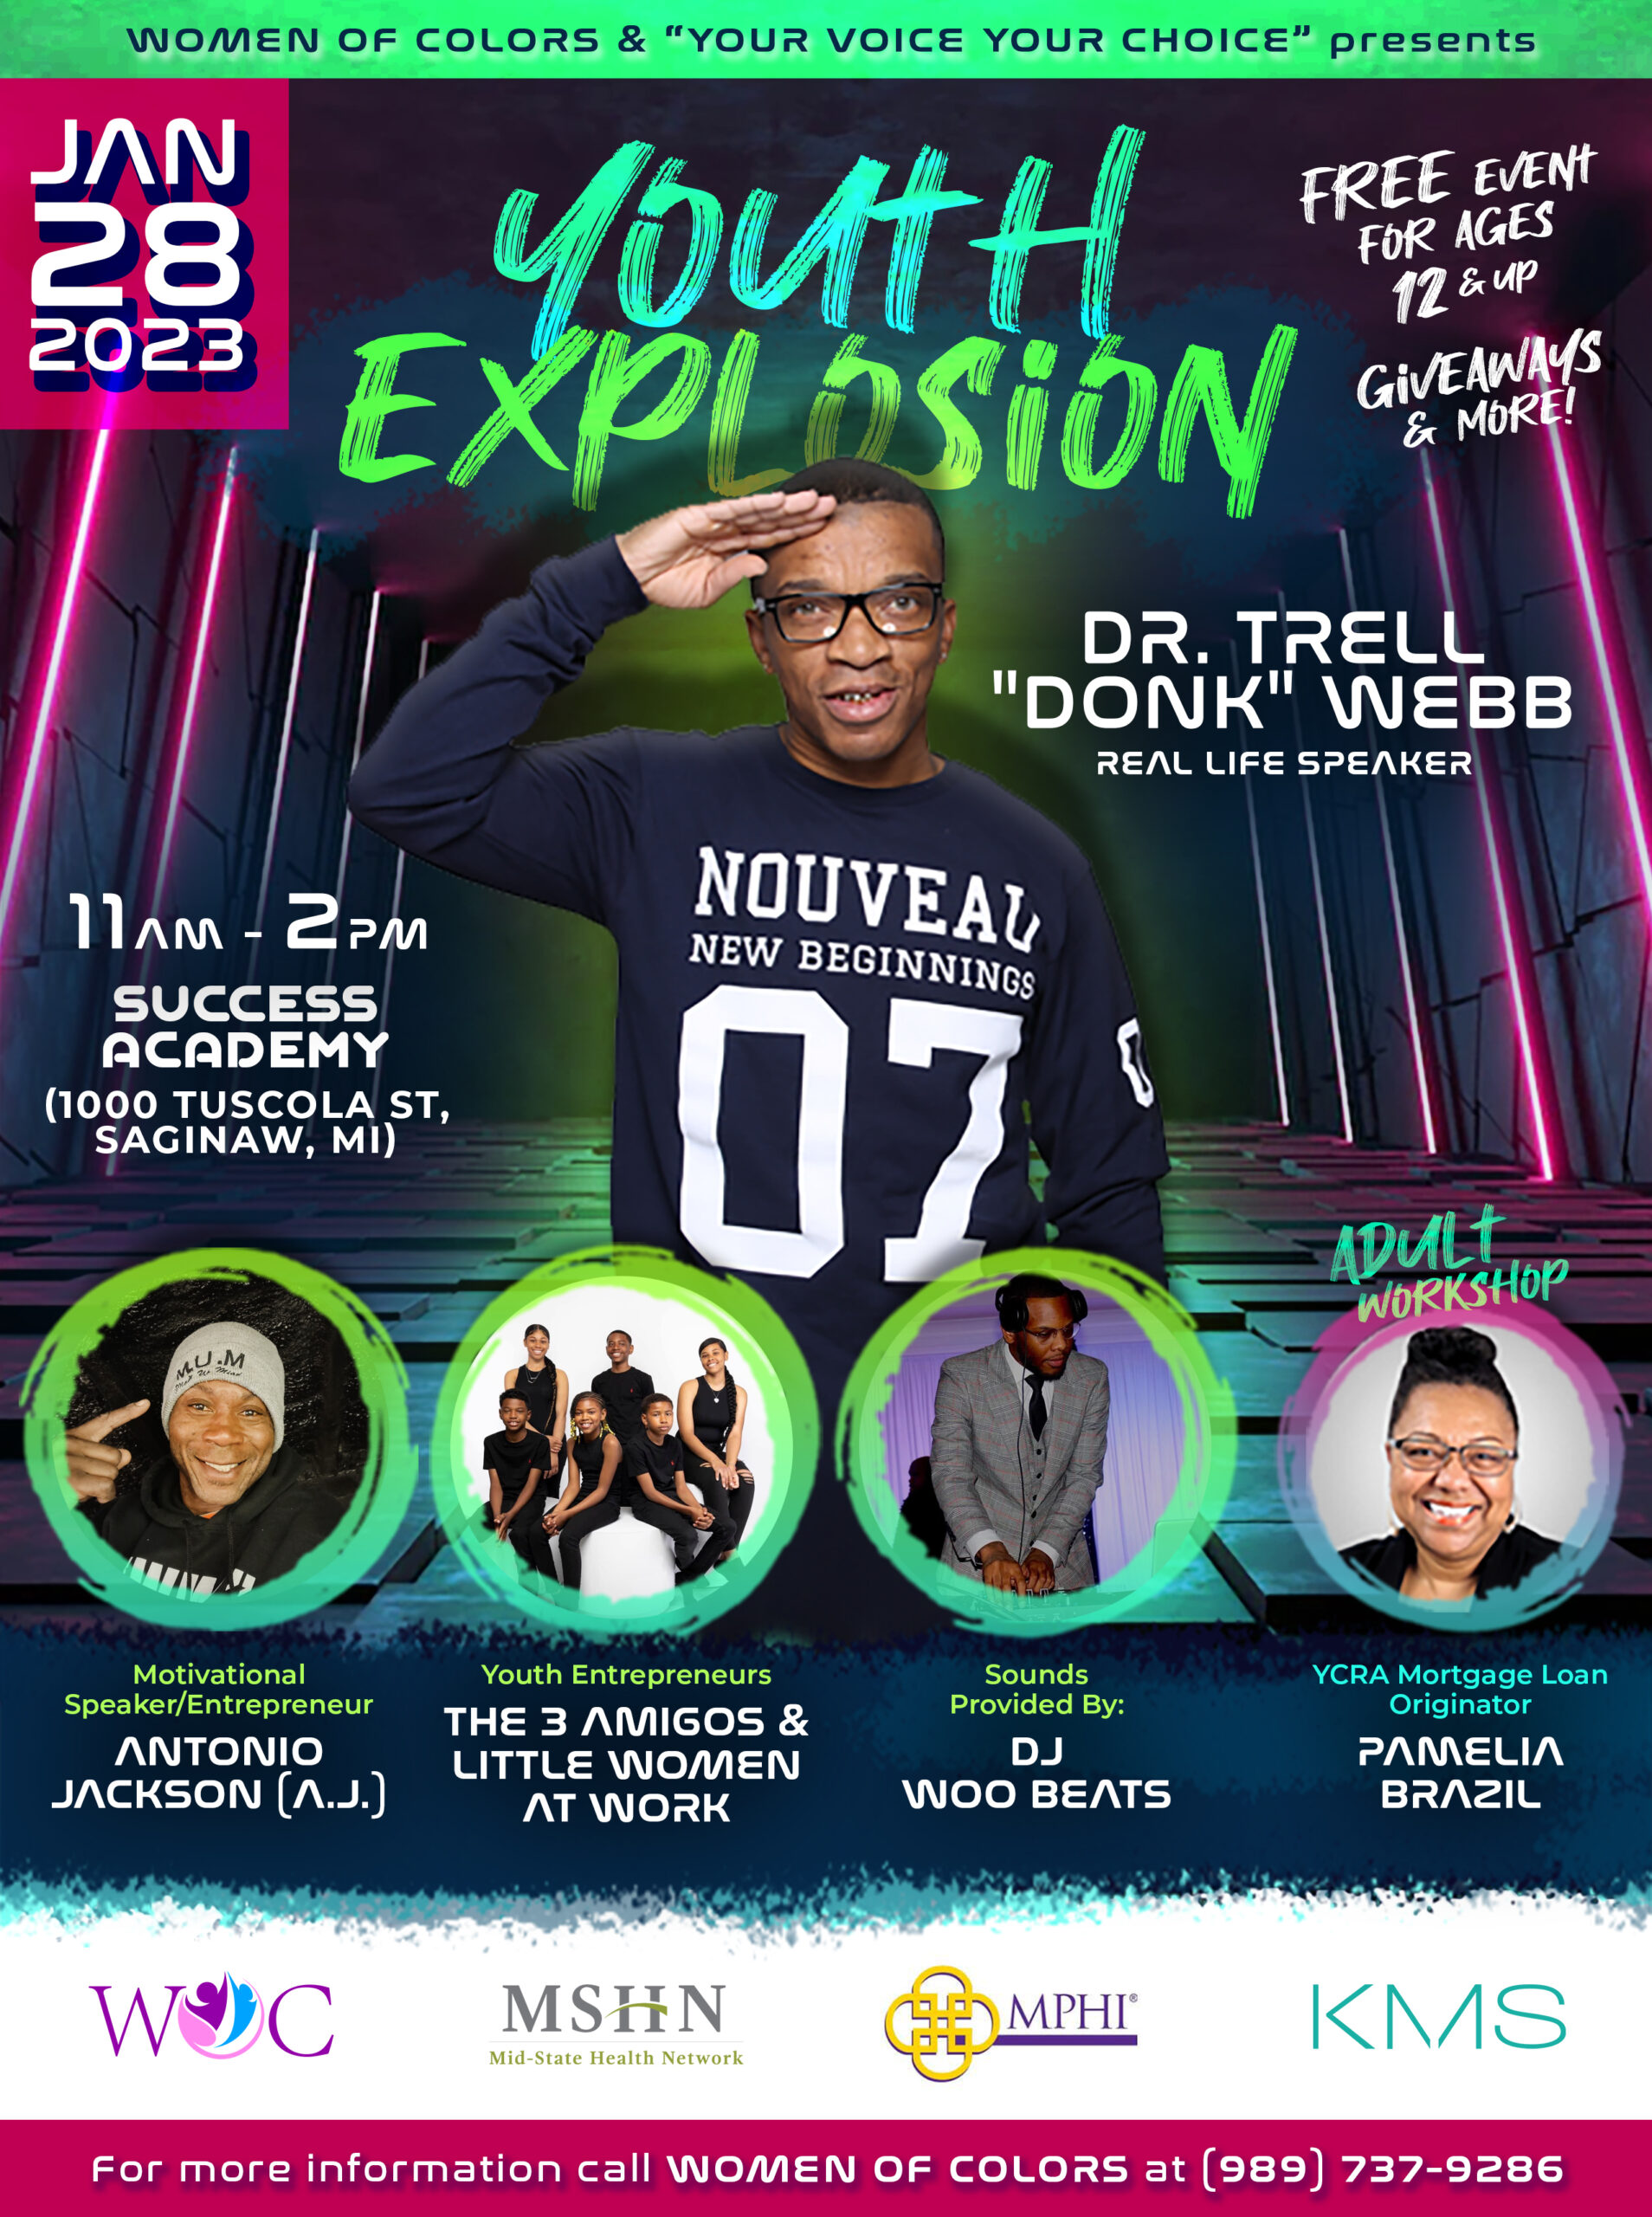 <h1 class="tribe-events-single-event-title">WOMEN OF COLORS AND “YOUR VOICE YOUR CHOICE” presents YOUTH EXPLOSION</h1>